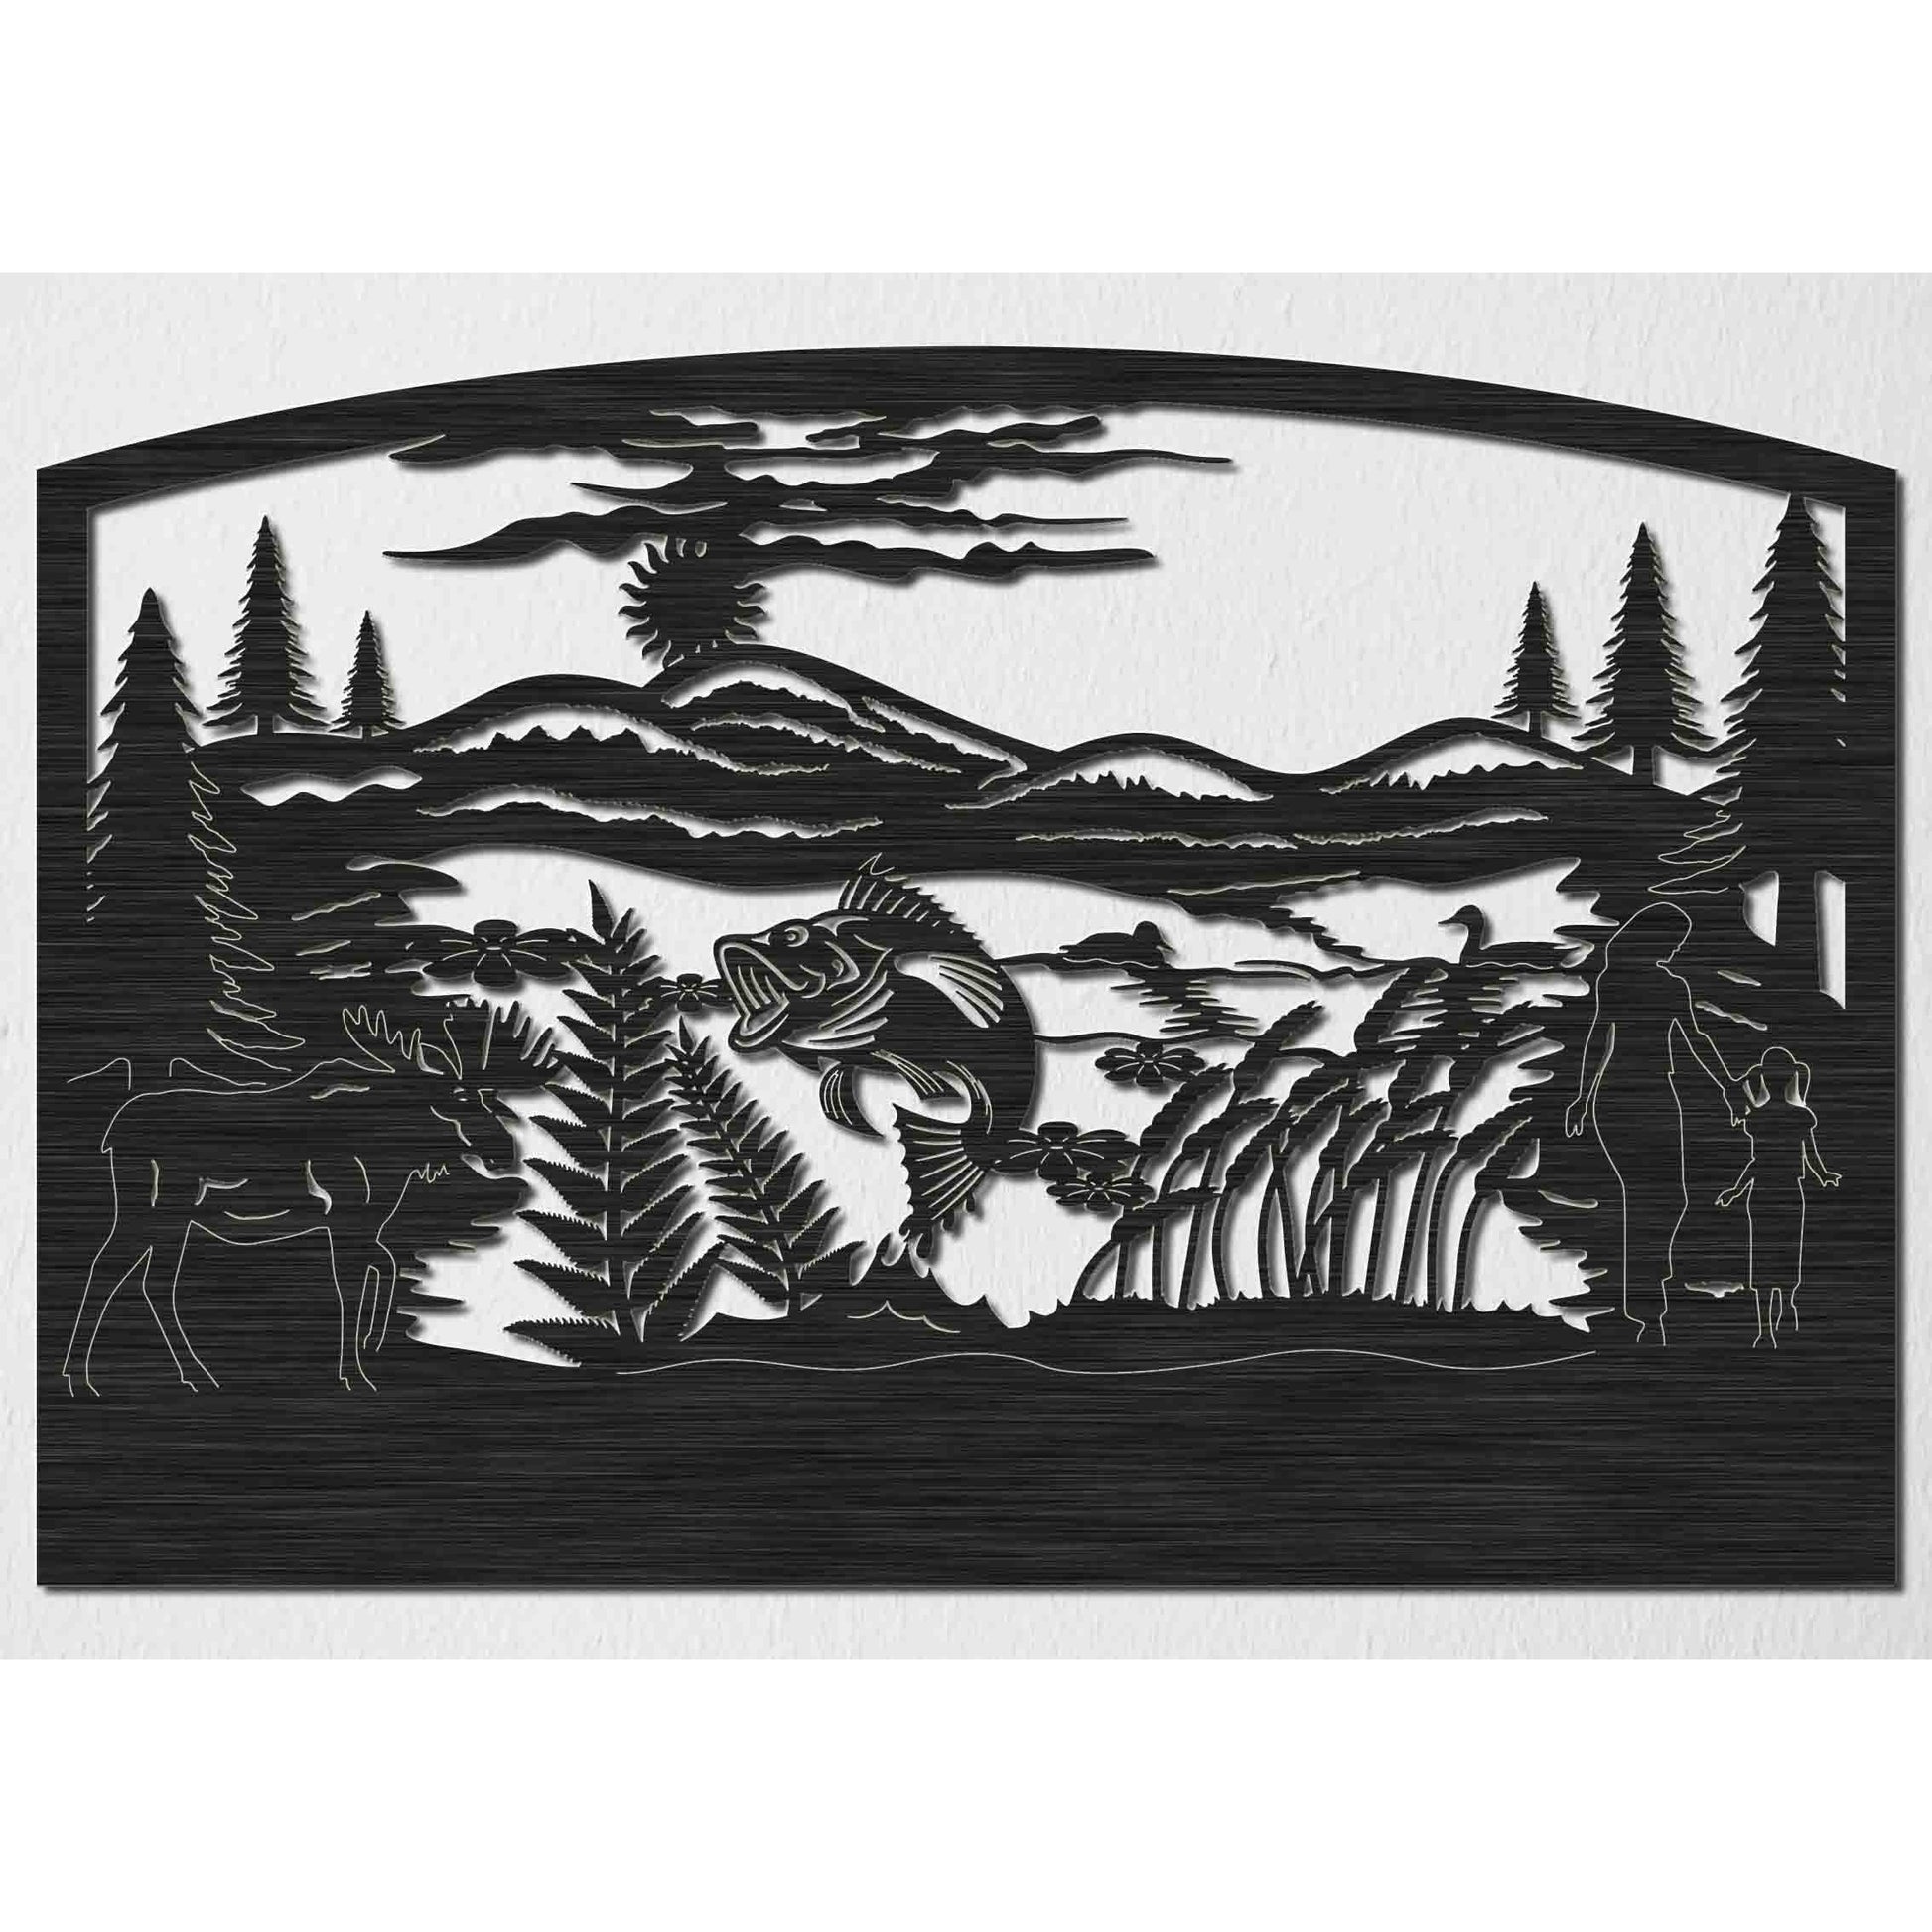 Lake of Fish and Loons with Hills, Moose and Trees Insert-DXFforCNC.com-DXF Files cut ready cnc machines